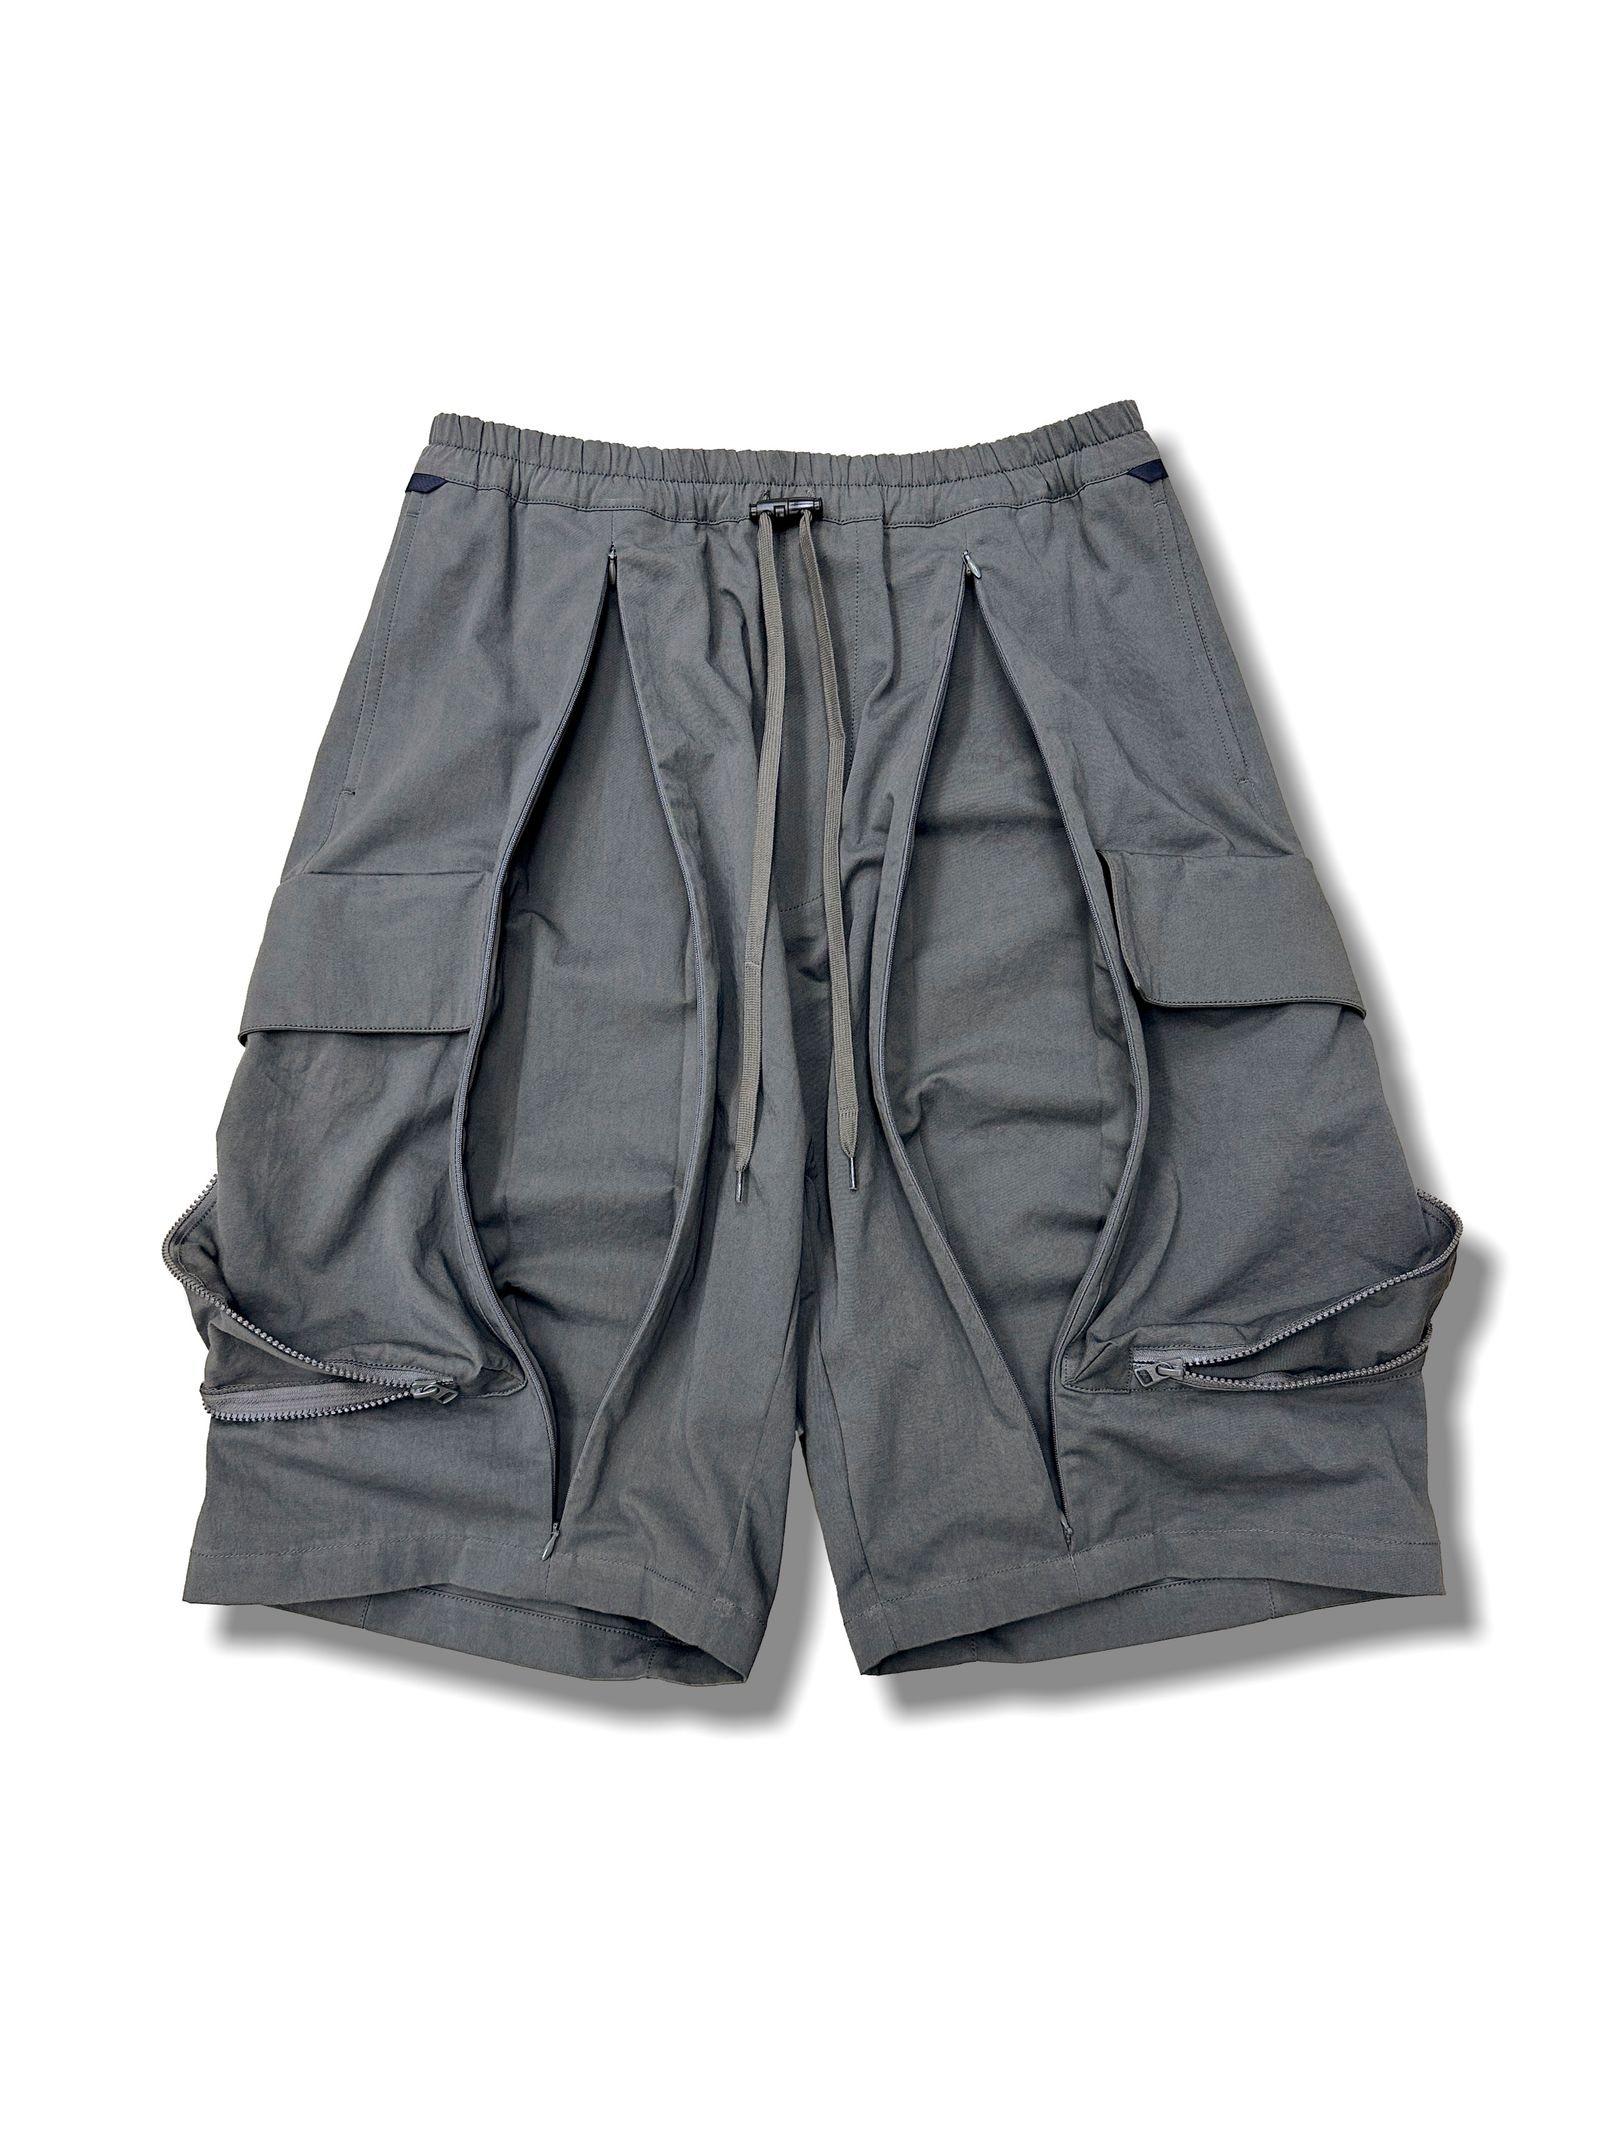 POLIQUANT - THE HIGH DENSITY S/L JUNGLE PANTS WITH DEFORMING LARGE